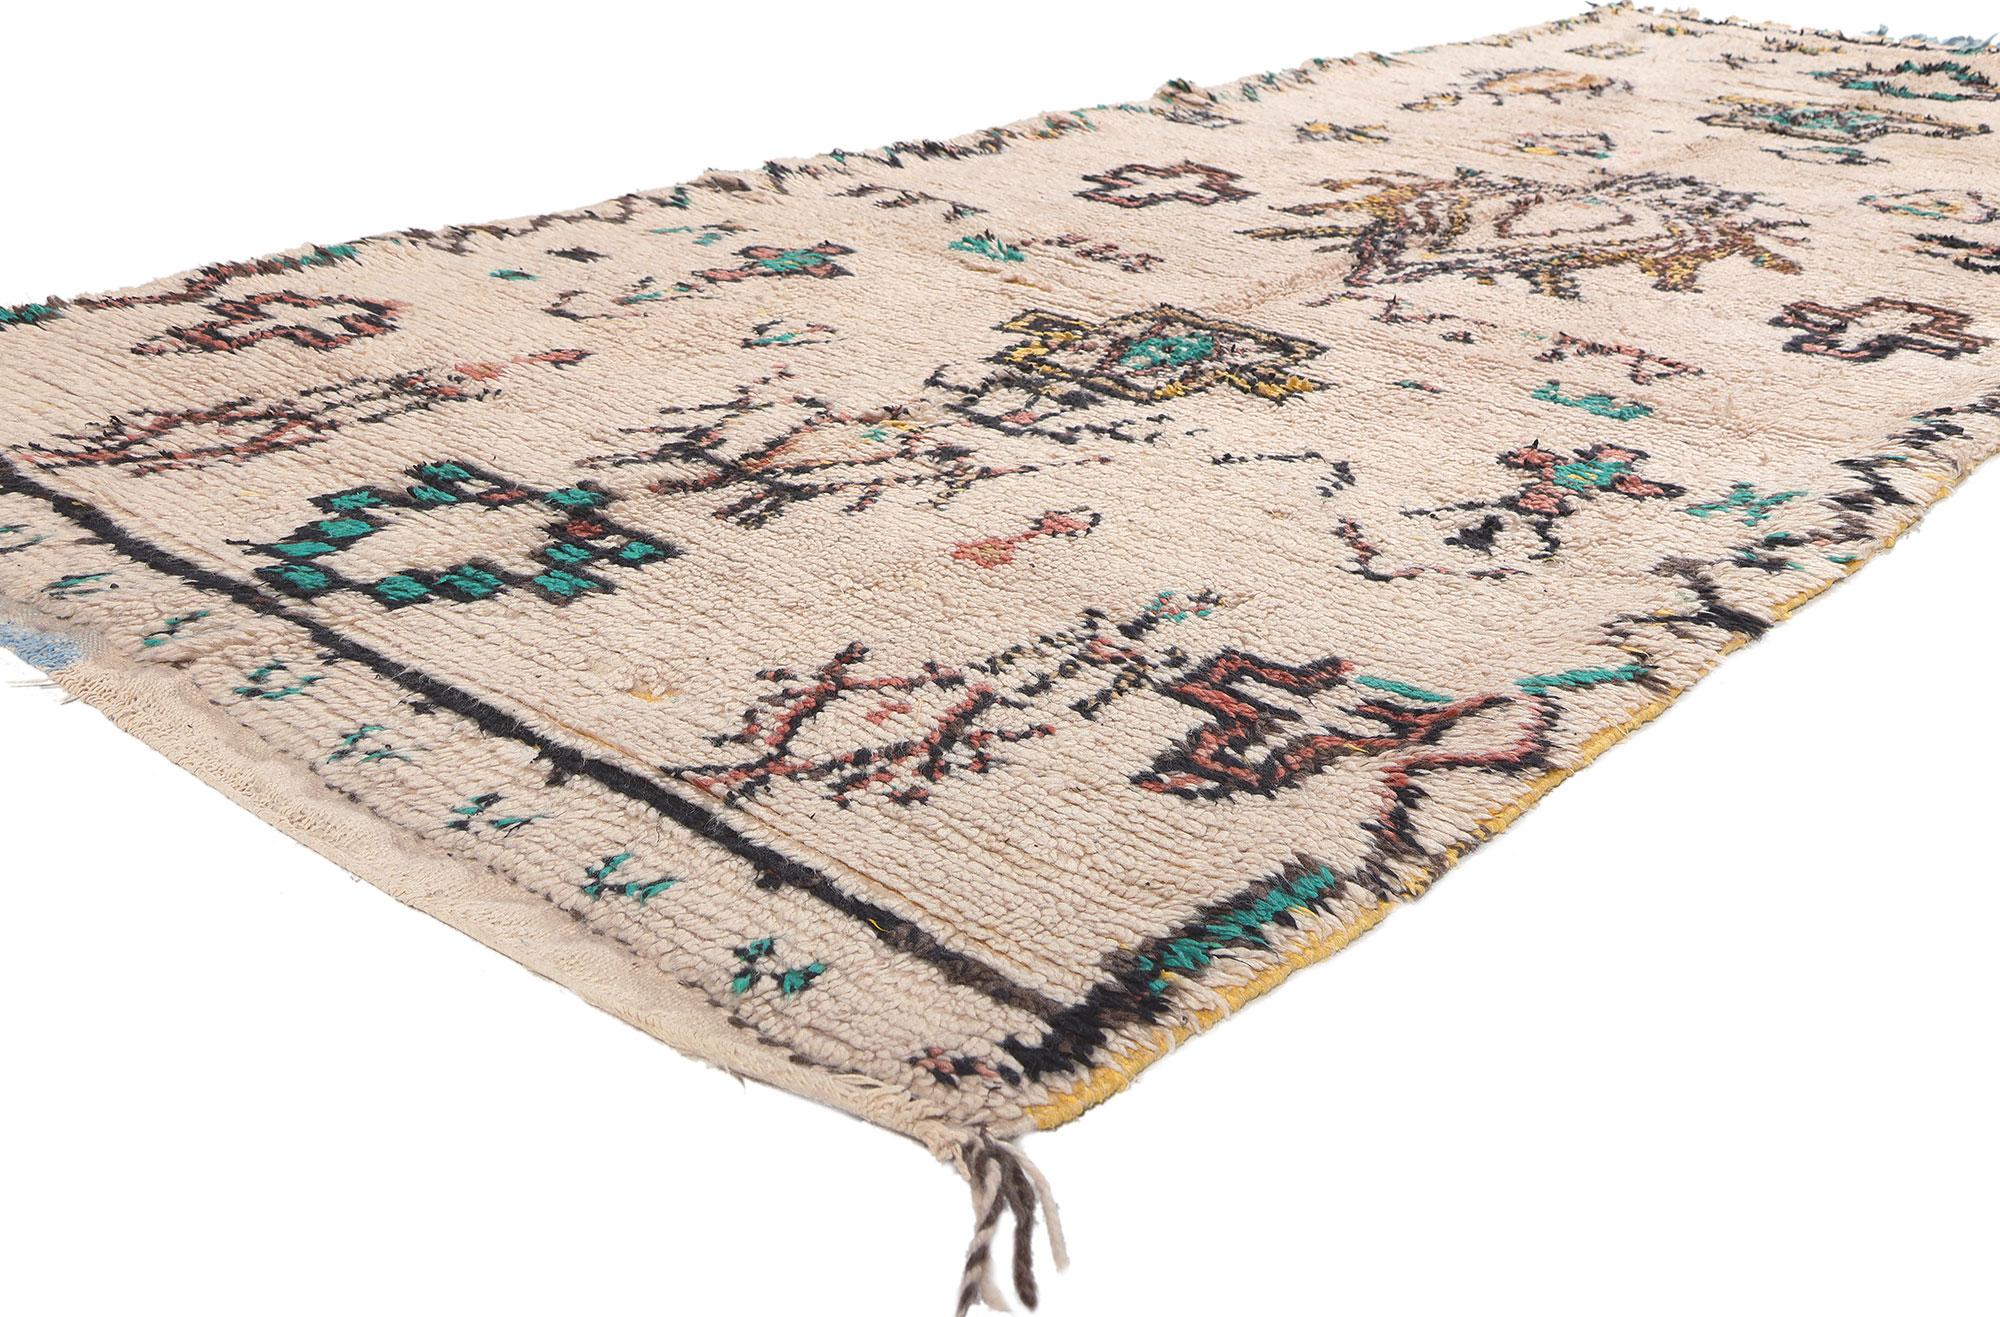 20670 Vintage Moroccan Azilal Rug, 04'06 x 10'10. Step into the captivating realm of Azilal rugs, where every fiber tells a story intricately crafted by skilled artisans amidst the vibrant landscapes of central Morocco and the majestic High Atlas